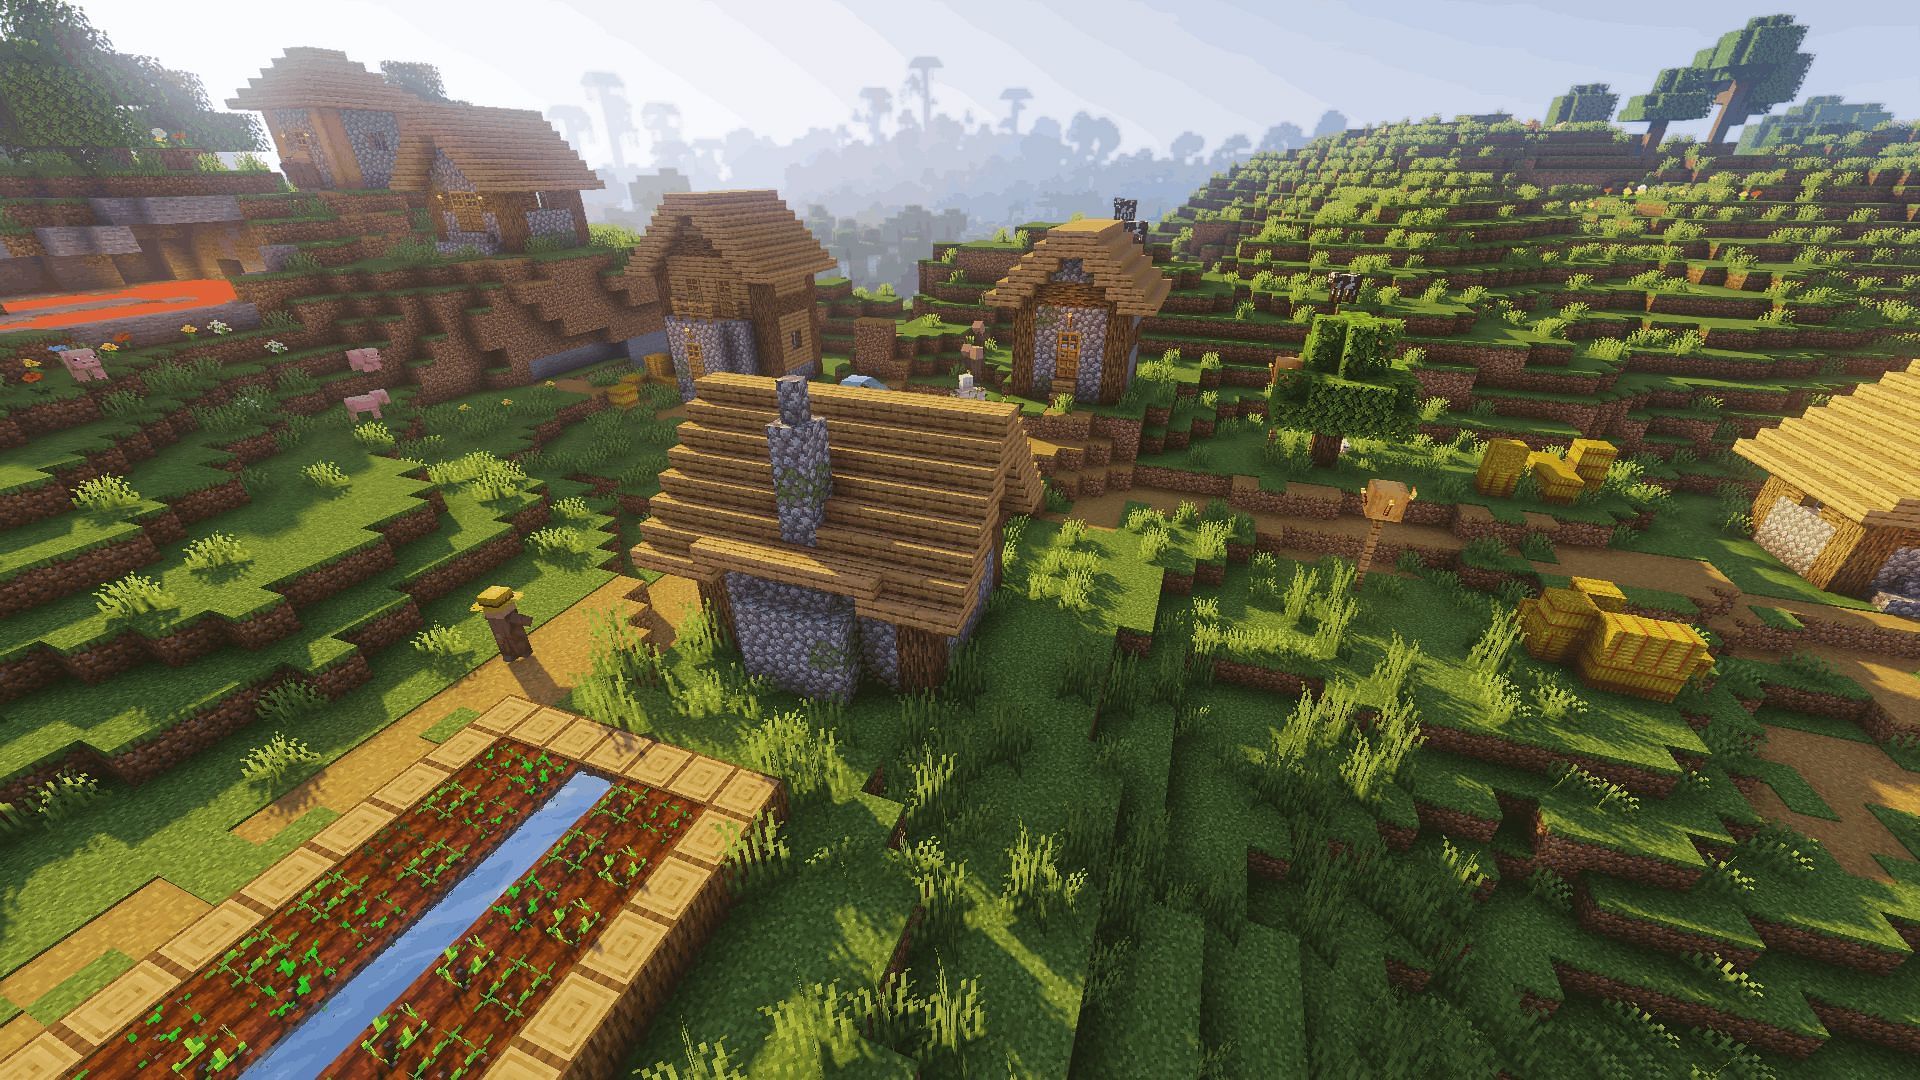 The plains village using the Too Many Effects shader (Image via Minecraft)